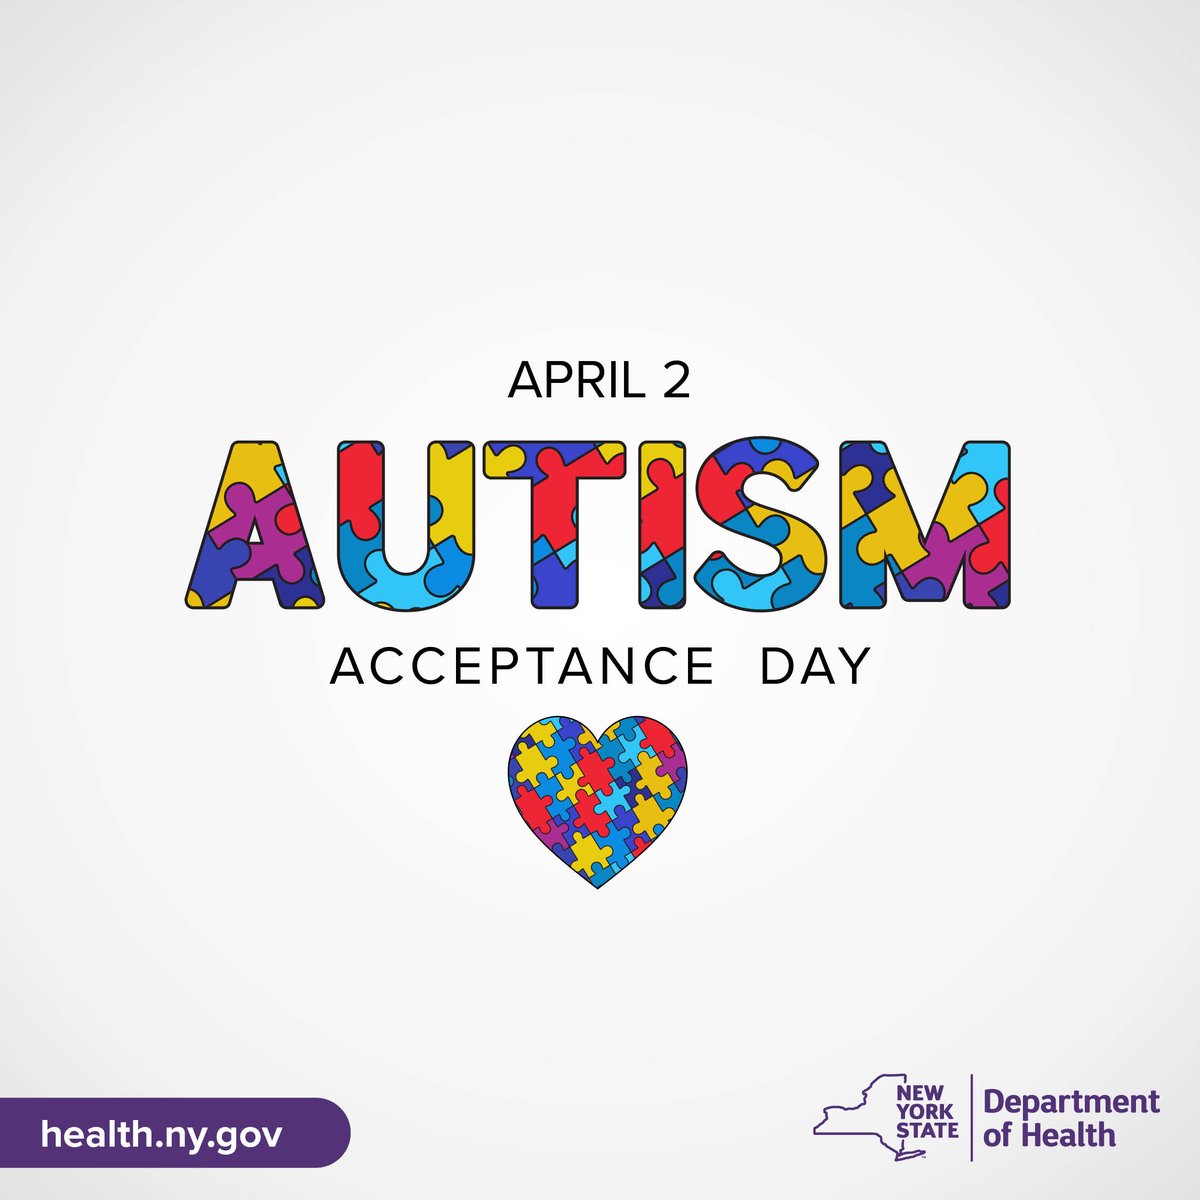 I am a proud father of two wonderful sons with autism. I am a better man, father and physician because of the profound impact they have had on me. Read my statement in support of Autism Acceptance Day: health.ny.gov/press/releases…